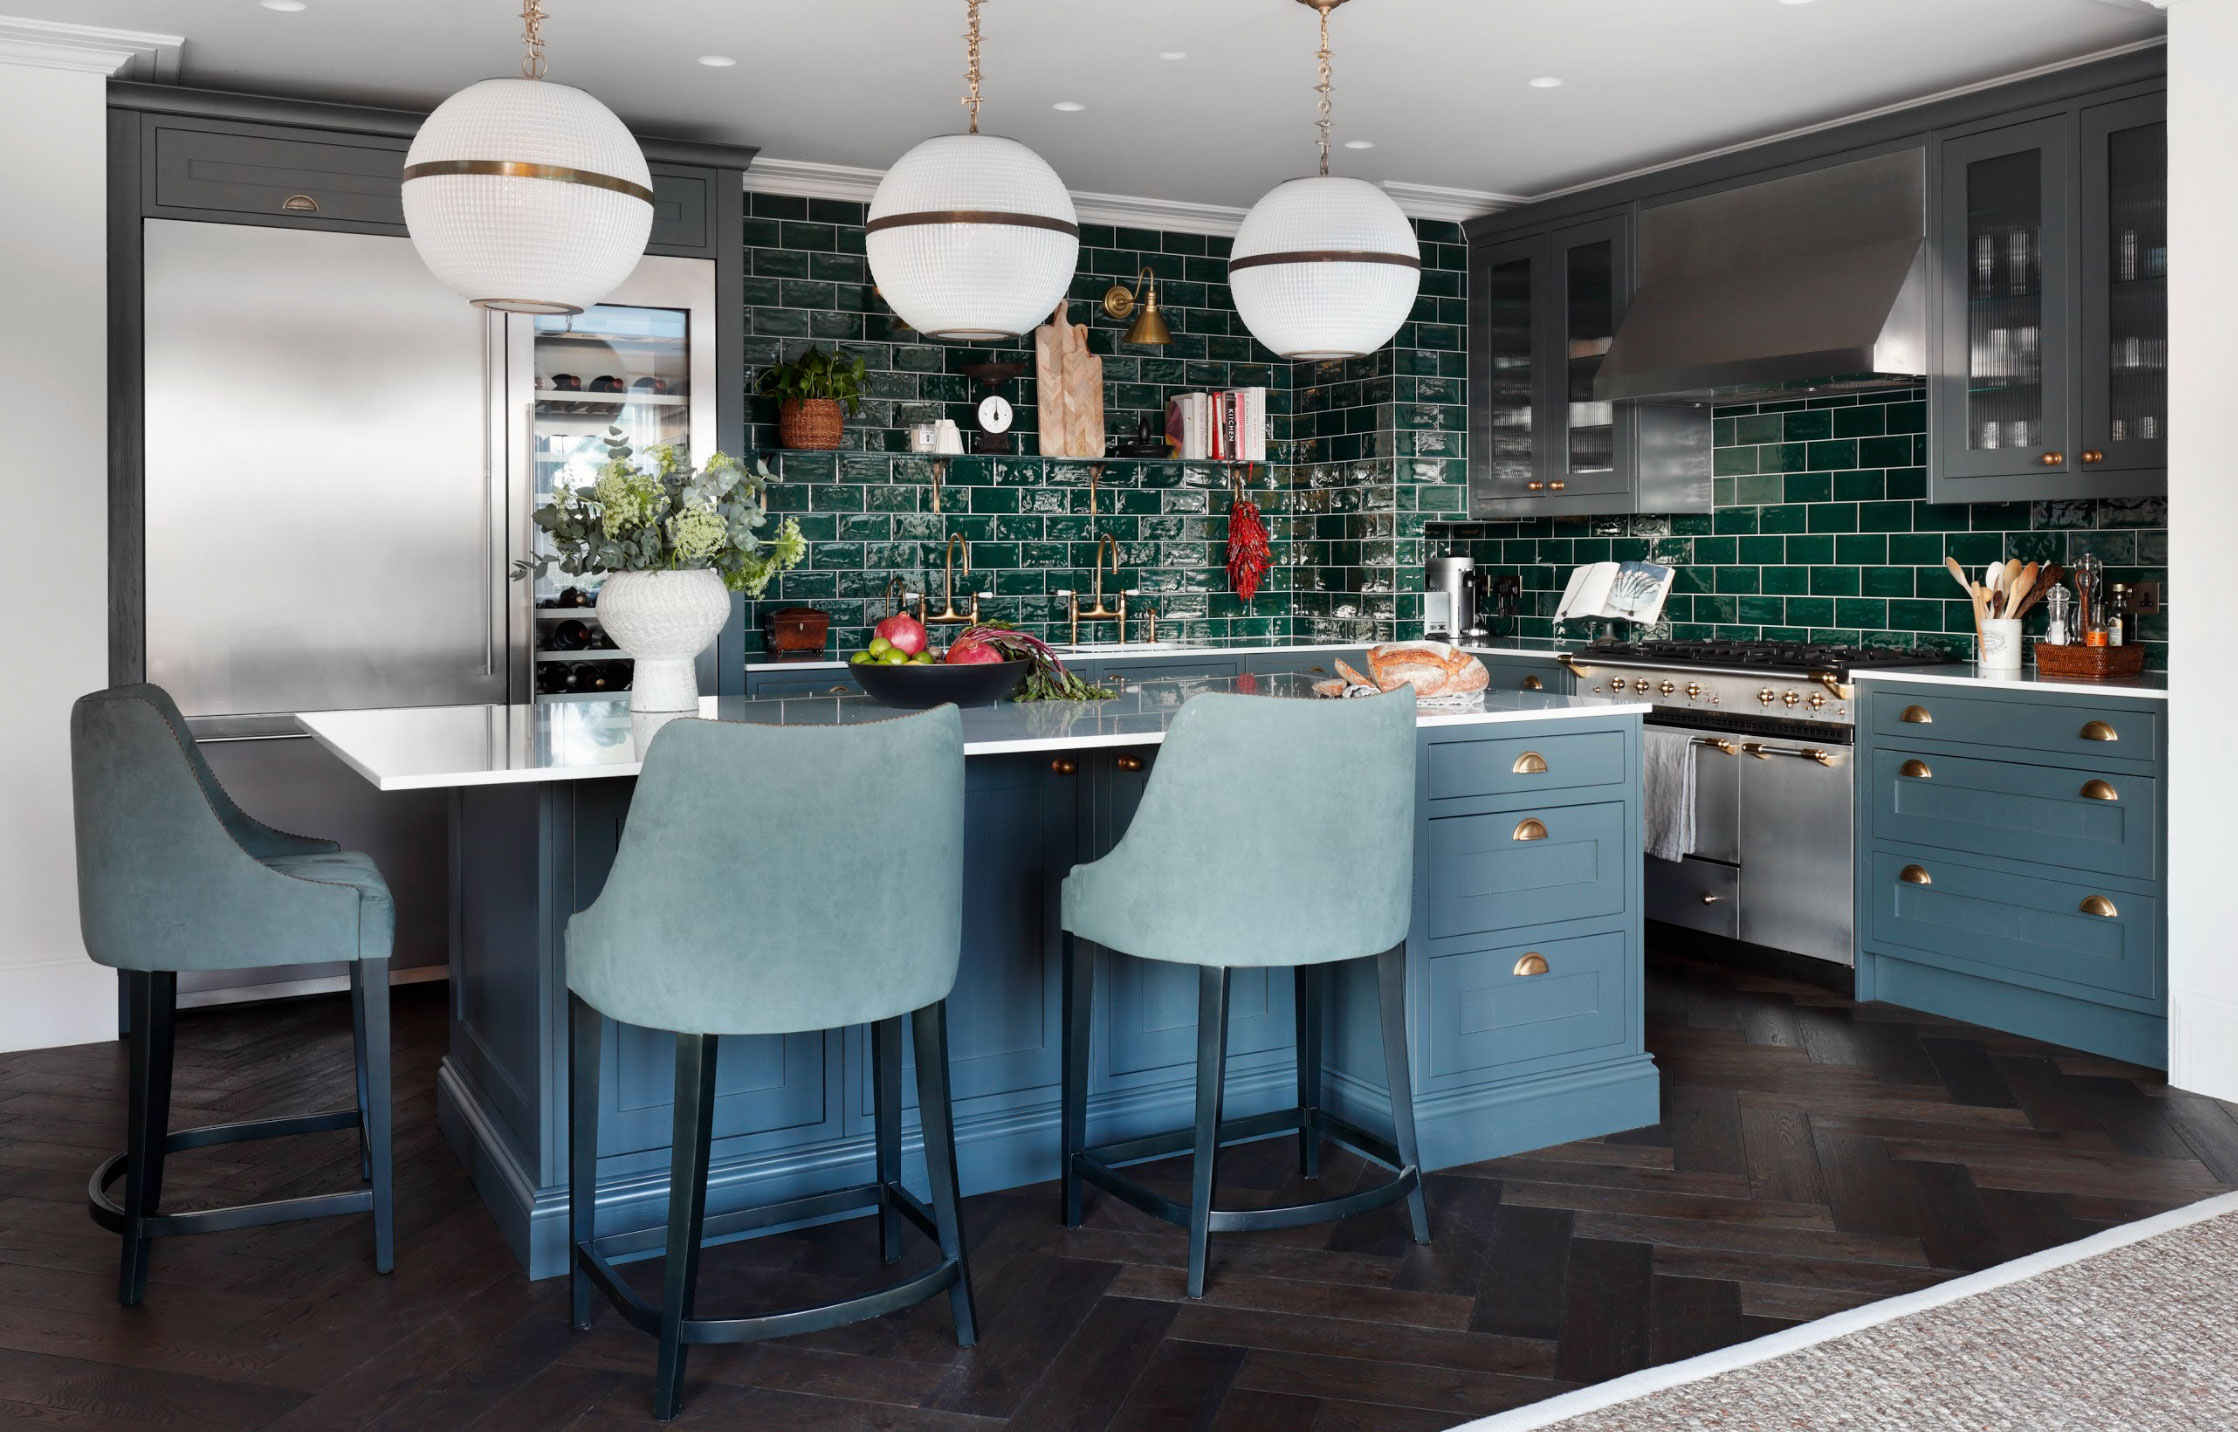 Designing a kitchen: an expert guide to planning a kitchen | Homes